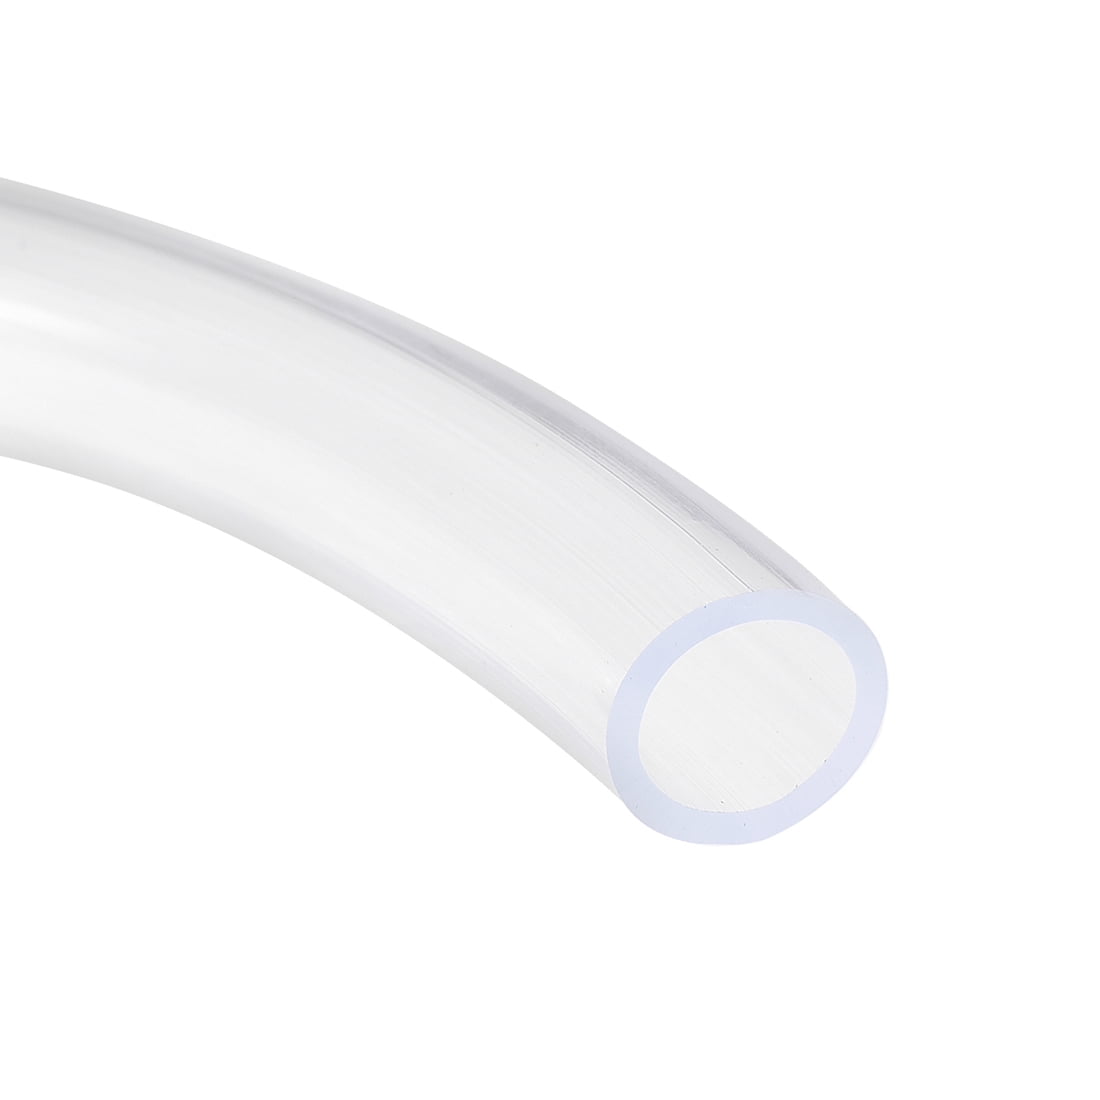 PVC Clear Vinly Tubing,8mm ID x 10mm OD,2Meter/6.56ft,Plastic Flexible Hose Tube 